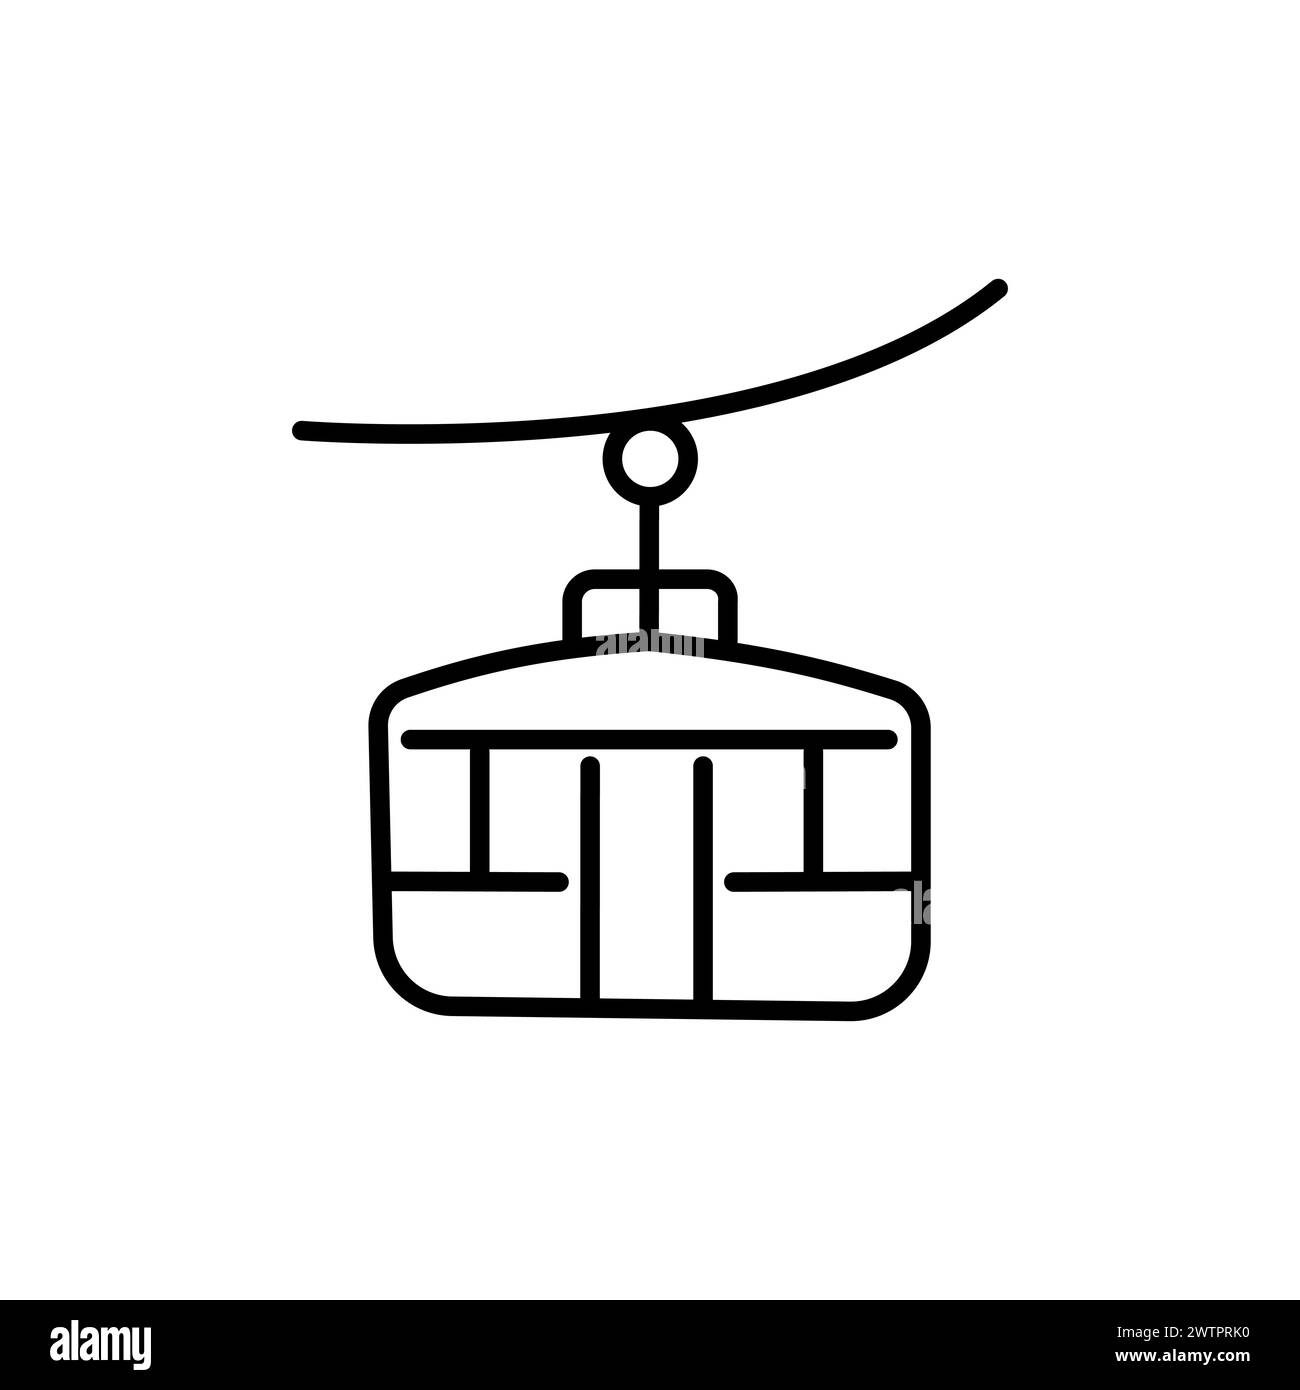 Funicular line icon. Sky train icon logo or illustration with outline stroke style vector design. perfect use for web, mobile app, pattern Stock Vector